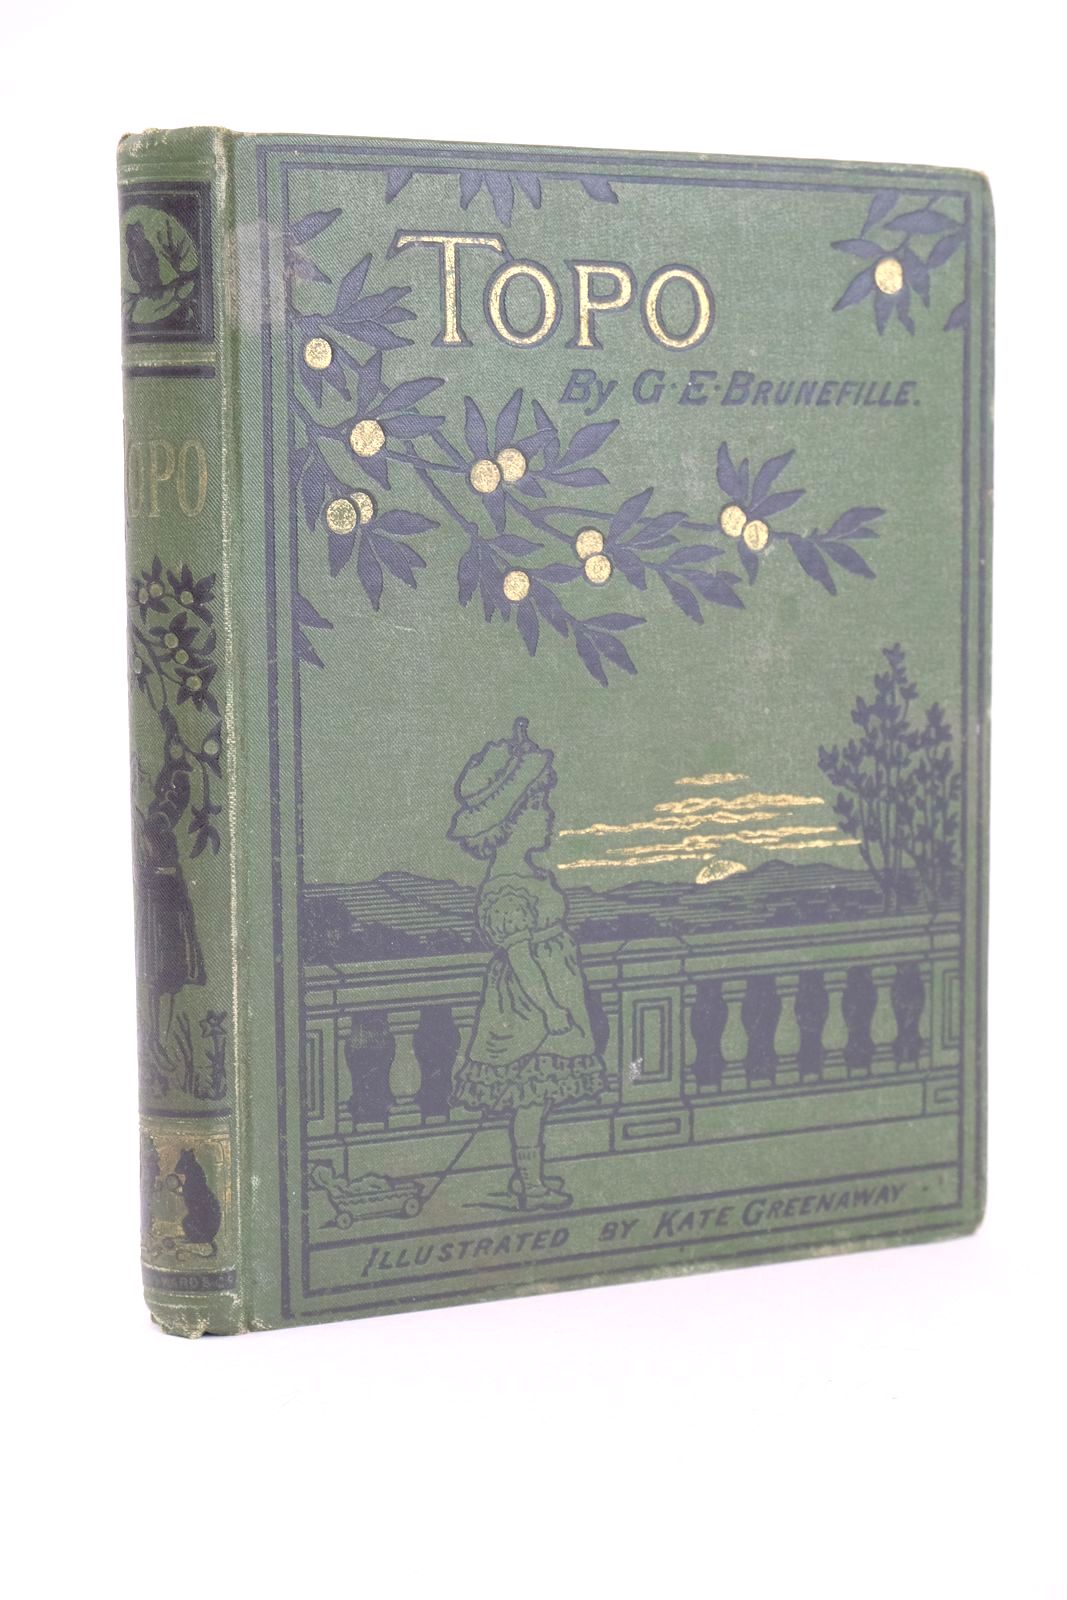 Photo of TOPO written by Brunefille, G.E. illustrated by Greenaway, Kate published by Marcus Ward &amp; Co. (STOCK CODE: 1325424)  for sale by Stella & Rose's Books